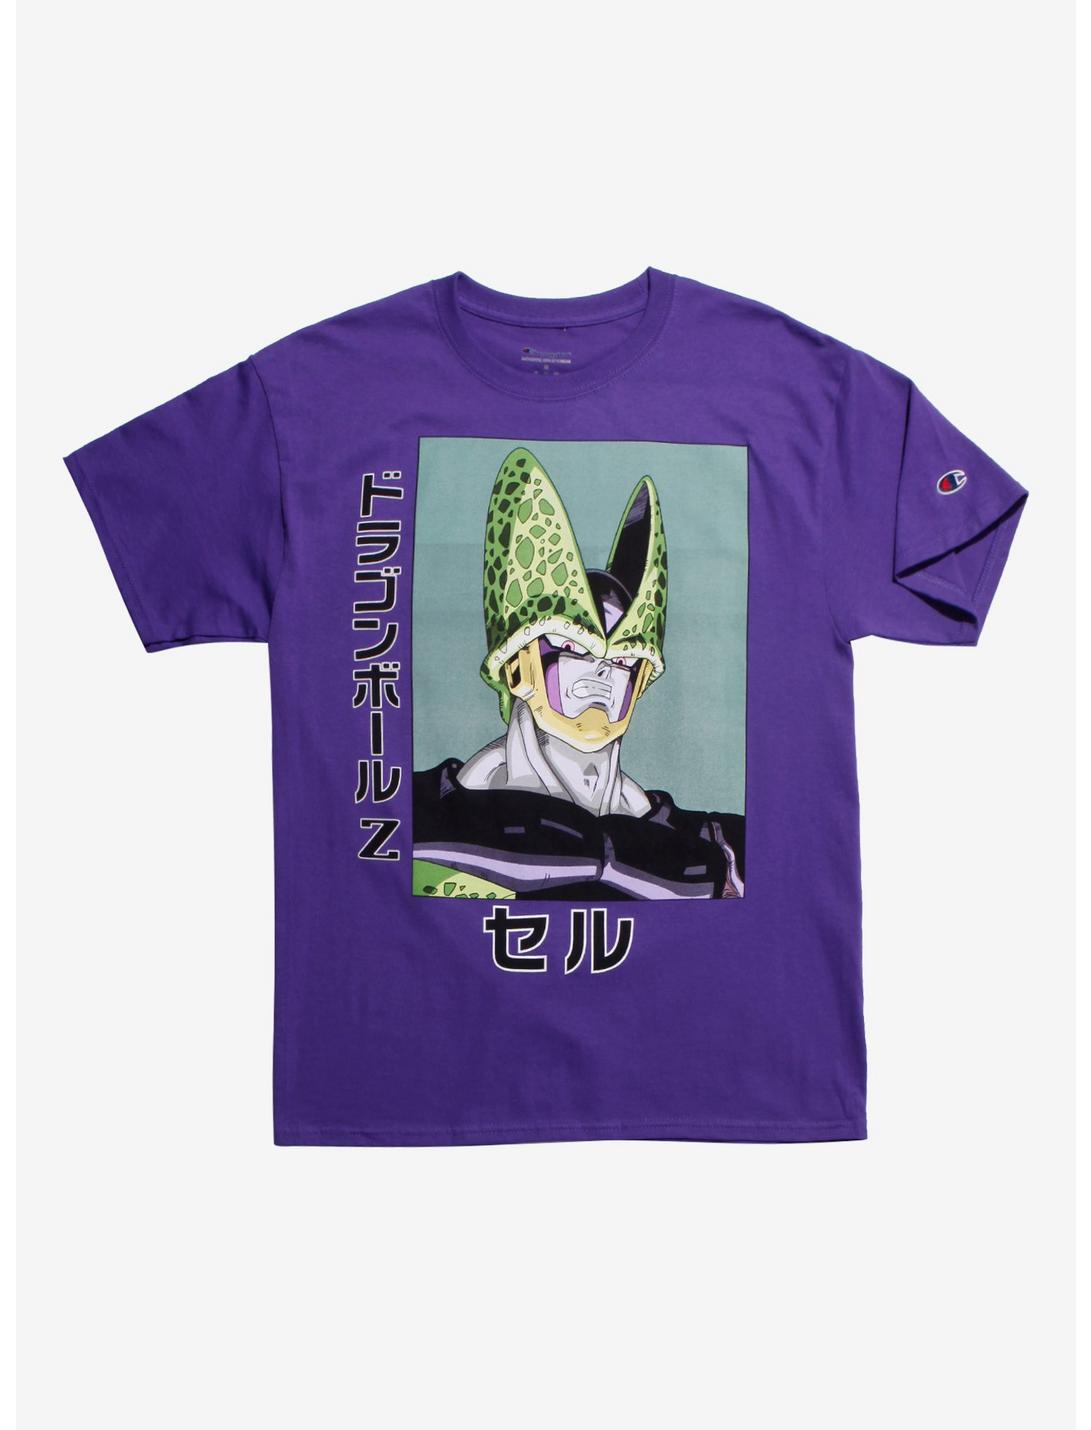 Dragon Ball Z Cell Purple T-Shirt Hot Topic Exclusive, PURPLE, hi-res